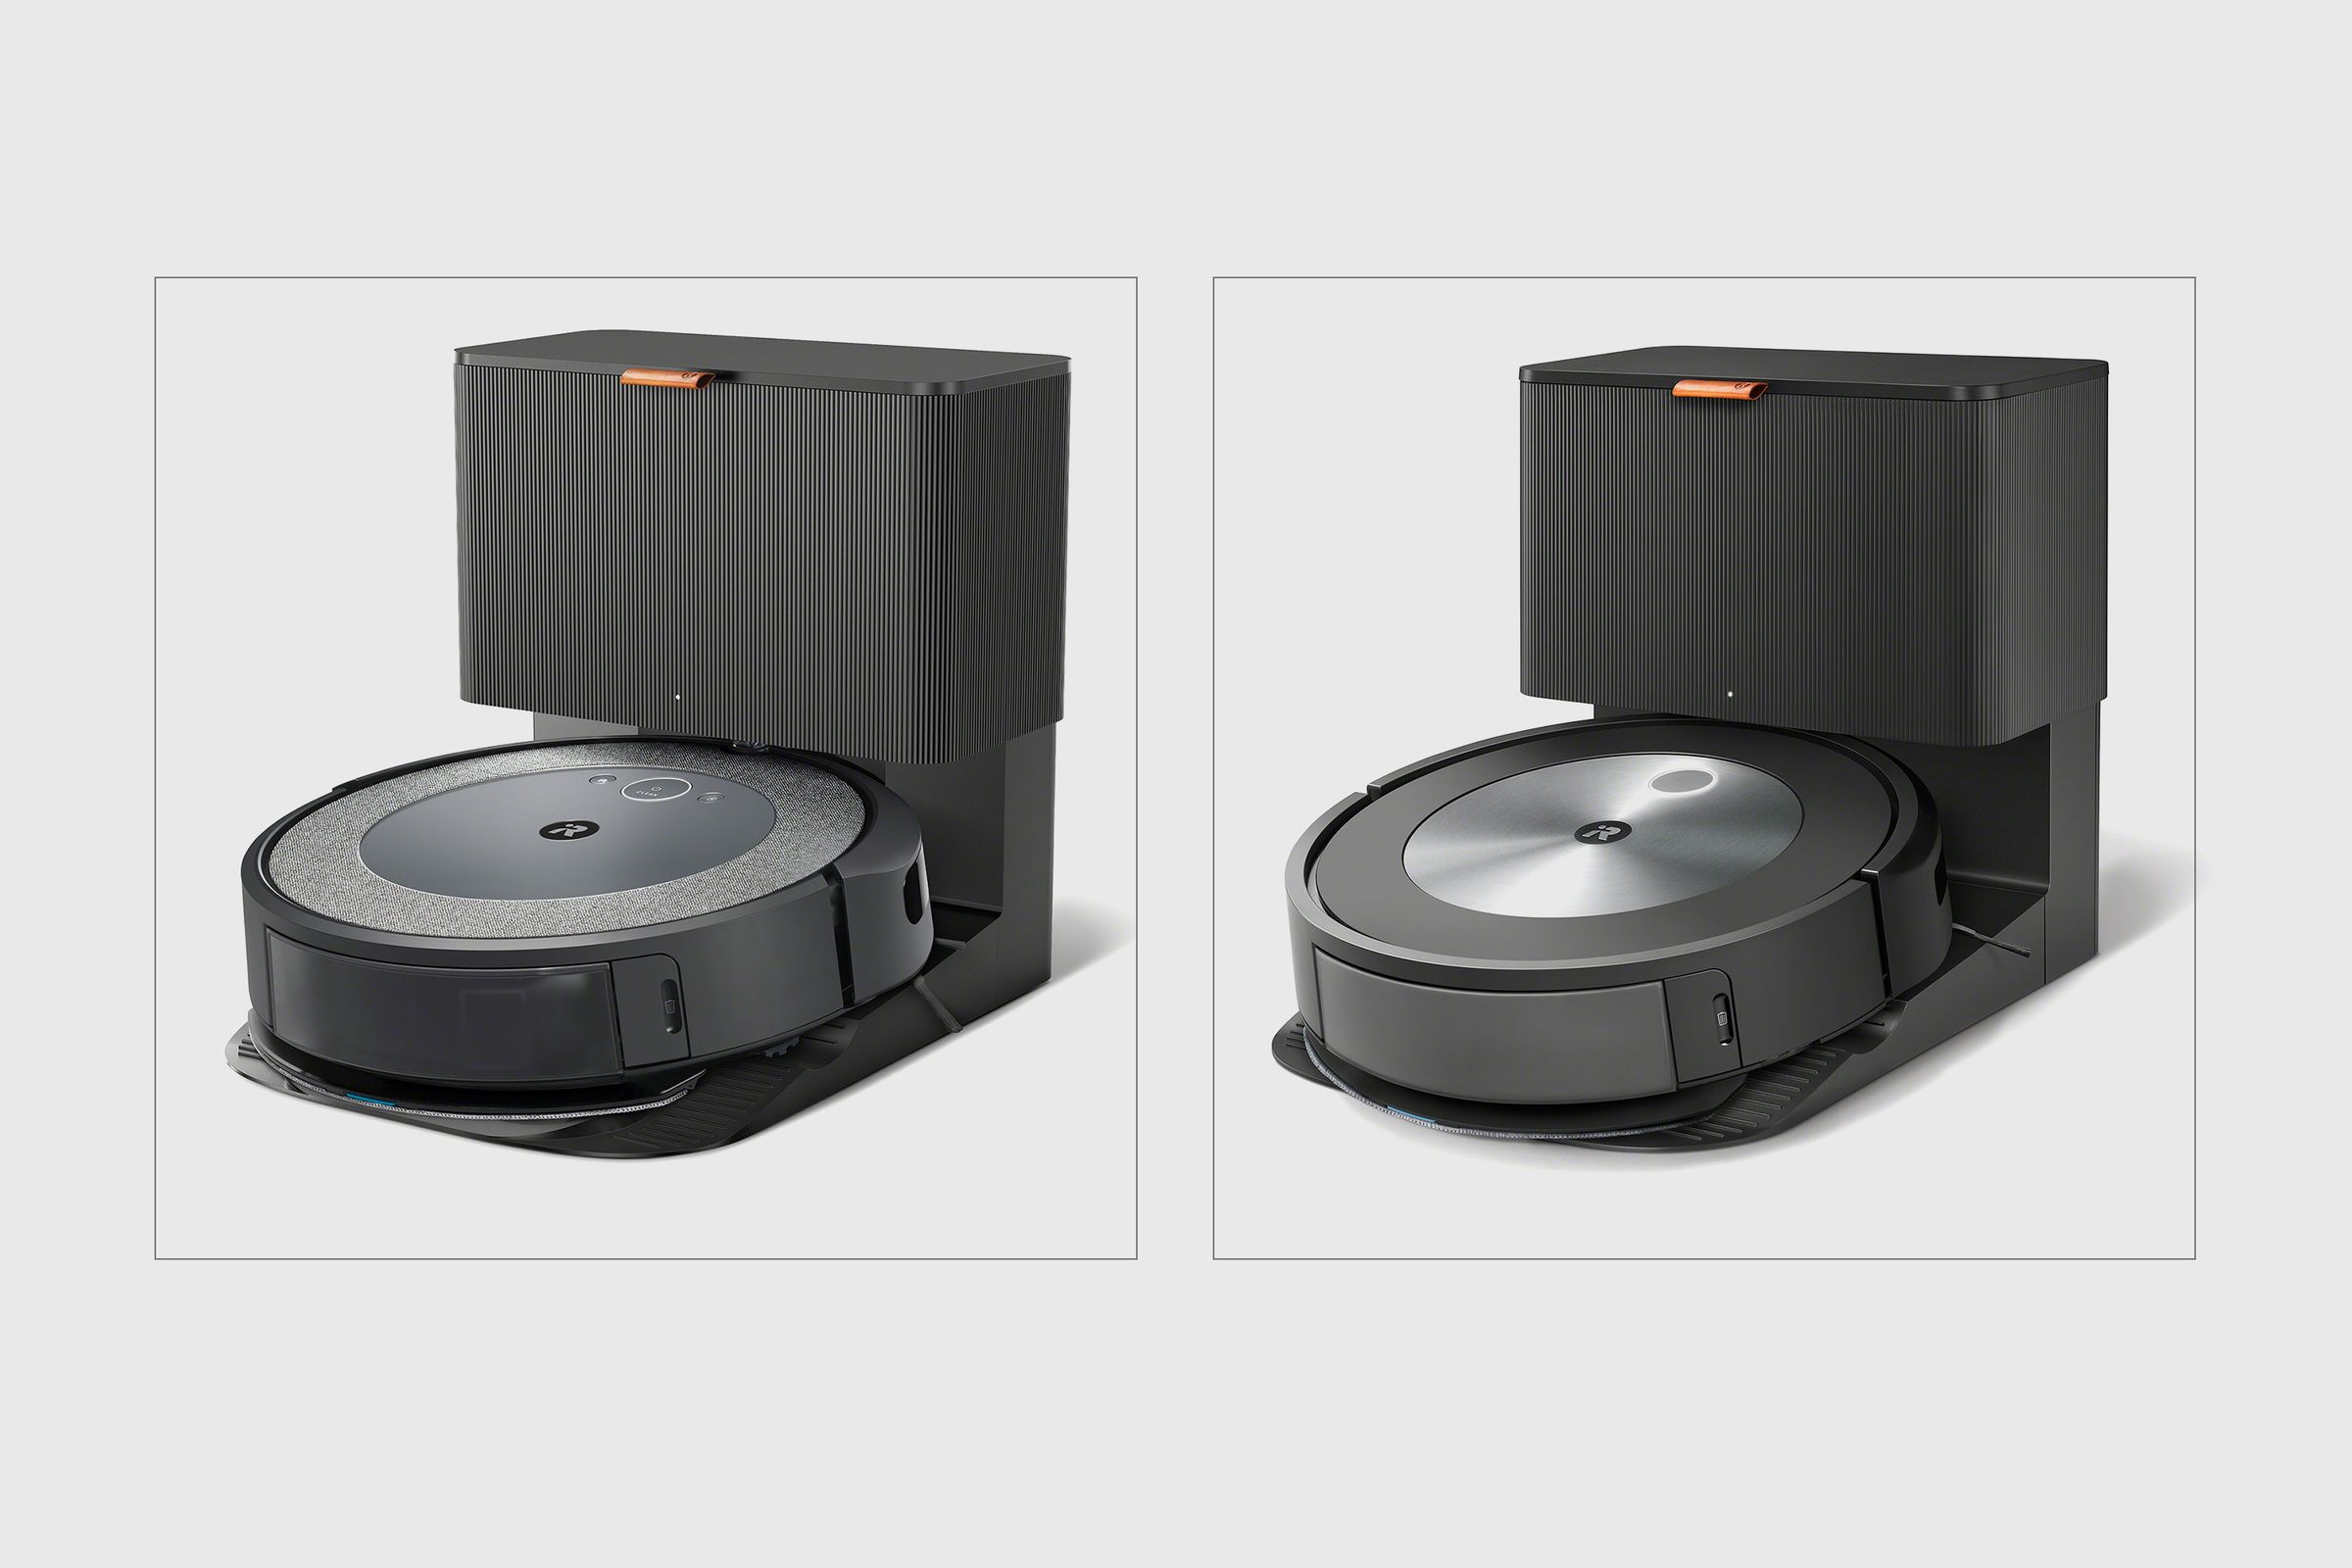 The Roomba Combo i5 Plus (left) and Combo j5 Plus (right) are new robot vacuum mops from iRobot. 